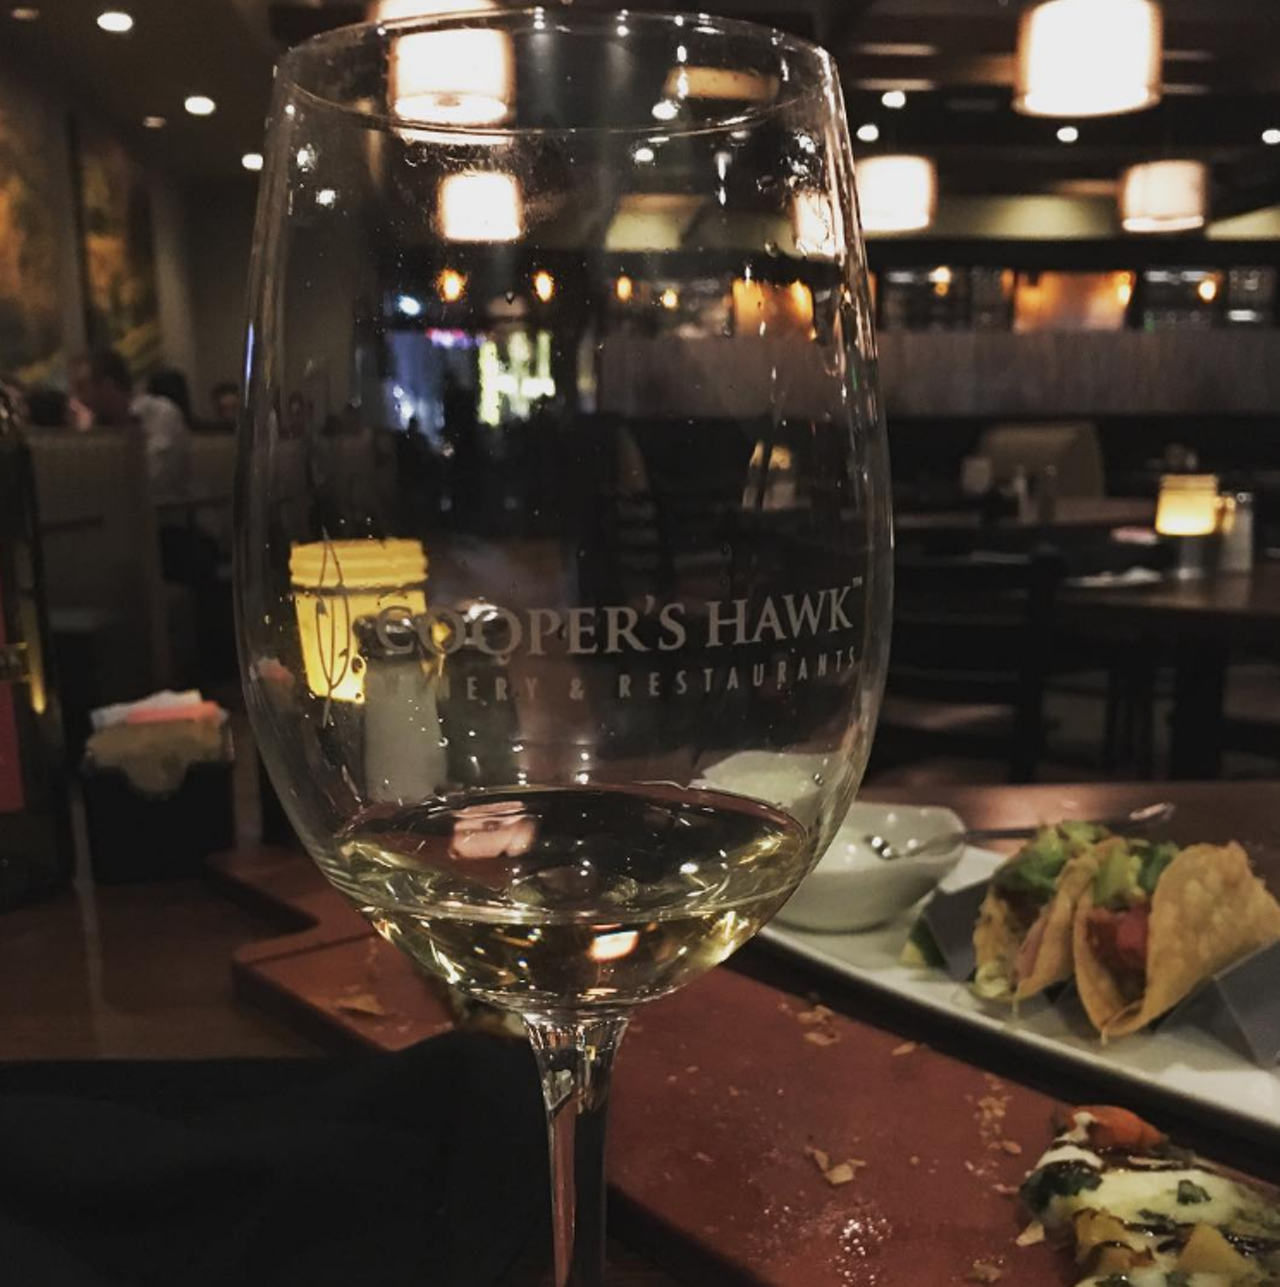 Cooper&#146;s Hawk Winery & Restaurant
Multiple locations
You could come here for dinner and peruse the mammoth menu, but really the wine list is the star. There&#146;s a monthly wine tasting menu and a gift shop with all the fancy things you&#146;ll need to pull off a tasting party at home.
Photo via maymaysue23/Instagram